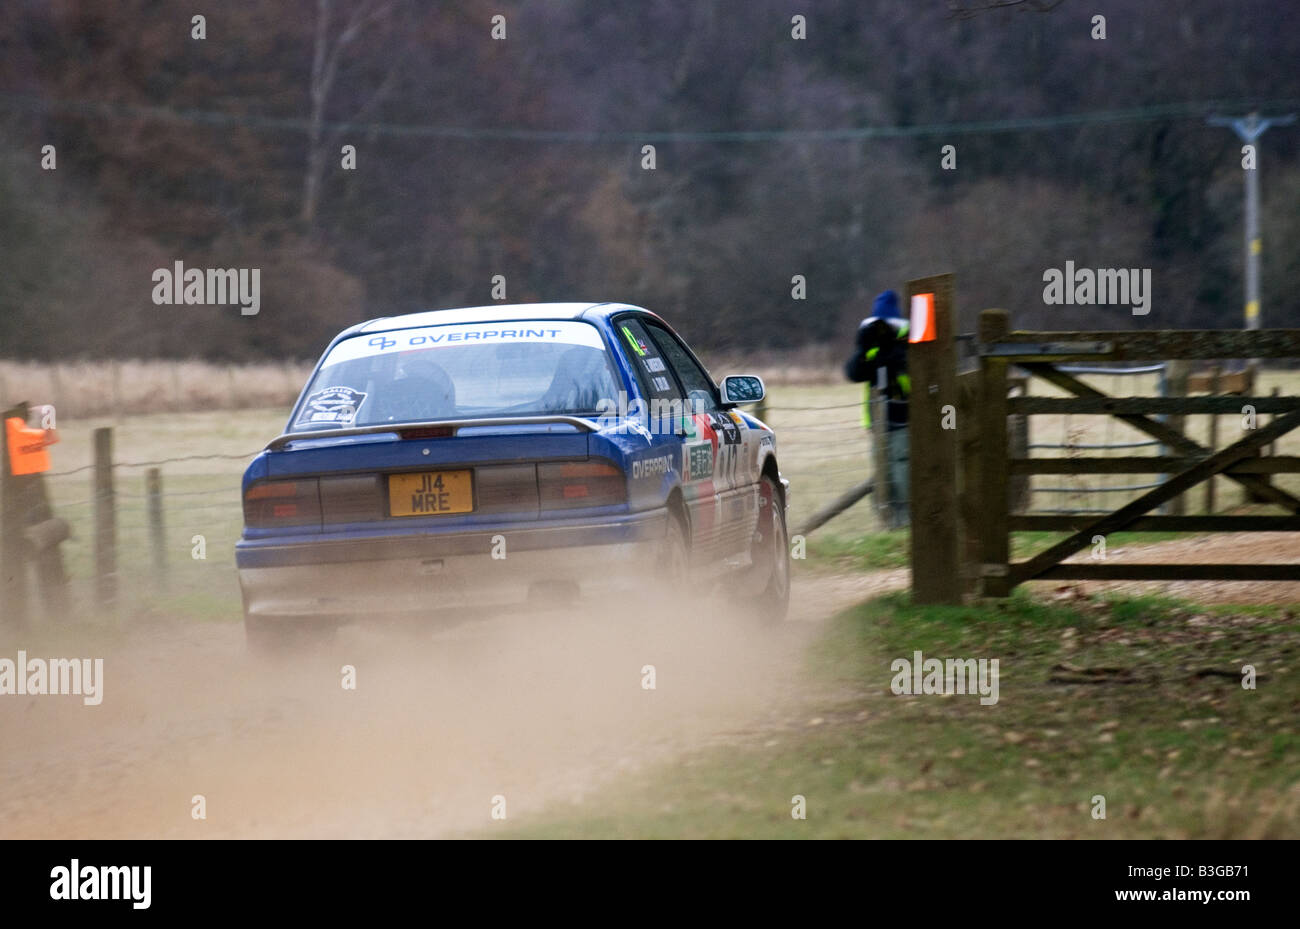 Mitsubishi Ralliart Galant rally car going over a cattle grid at speed Stock Photo